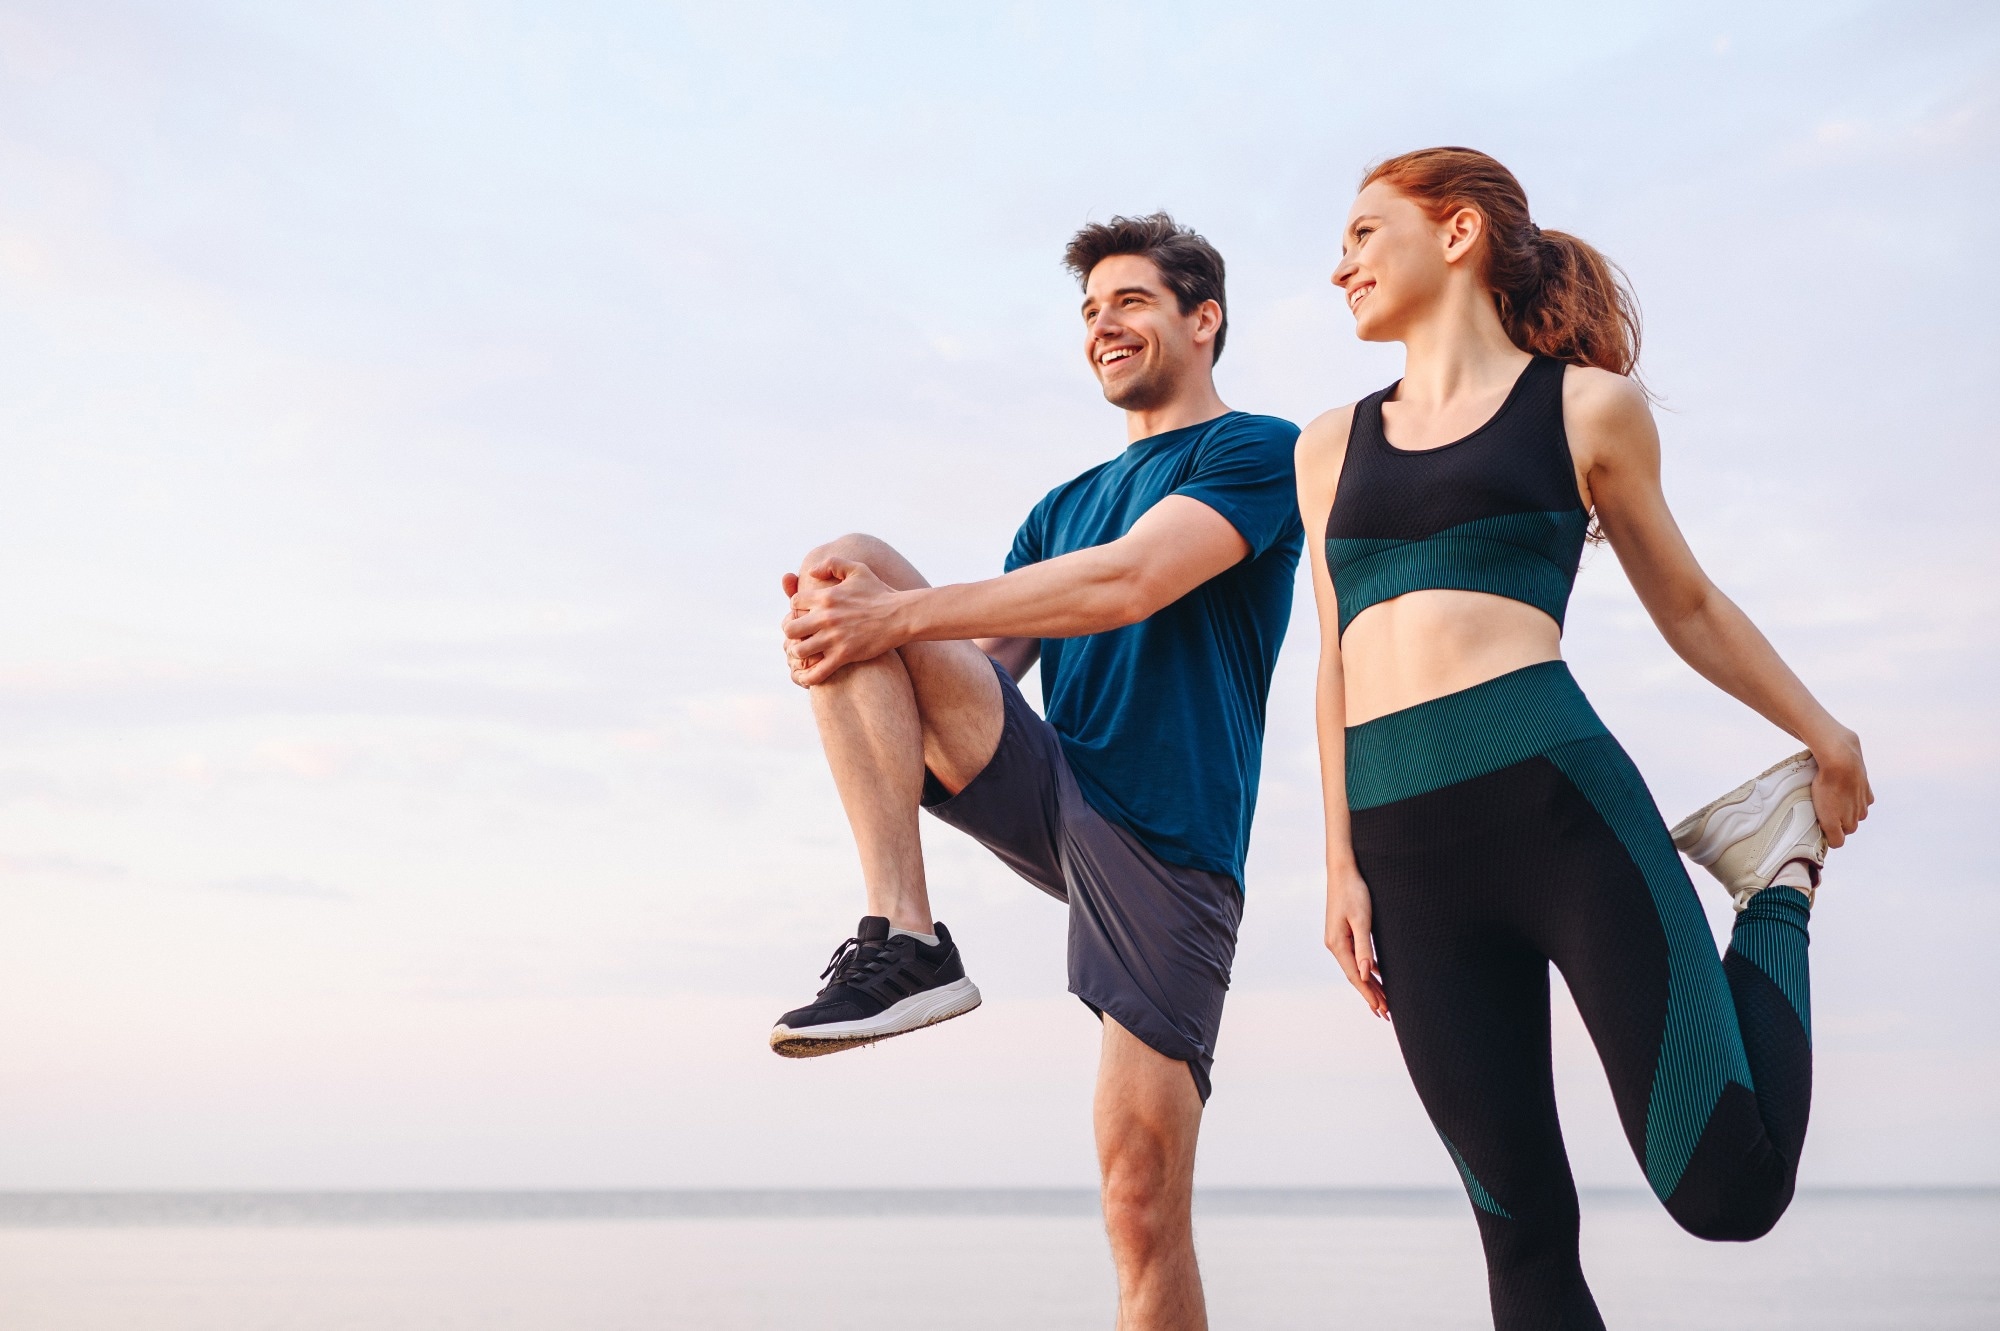 Study: Relationship between physical activity and risk of depression in a married group. Image Credit: ViDI Studio/Shutterstock.com